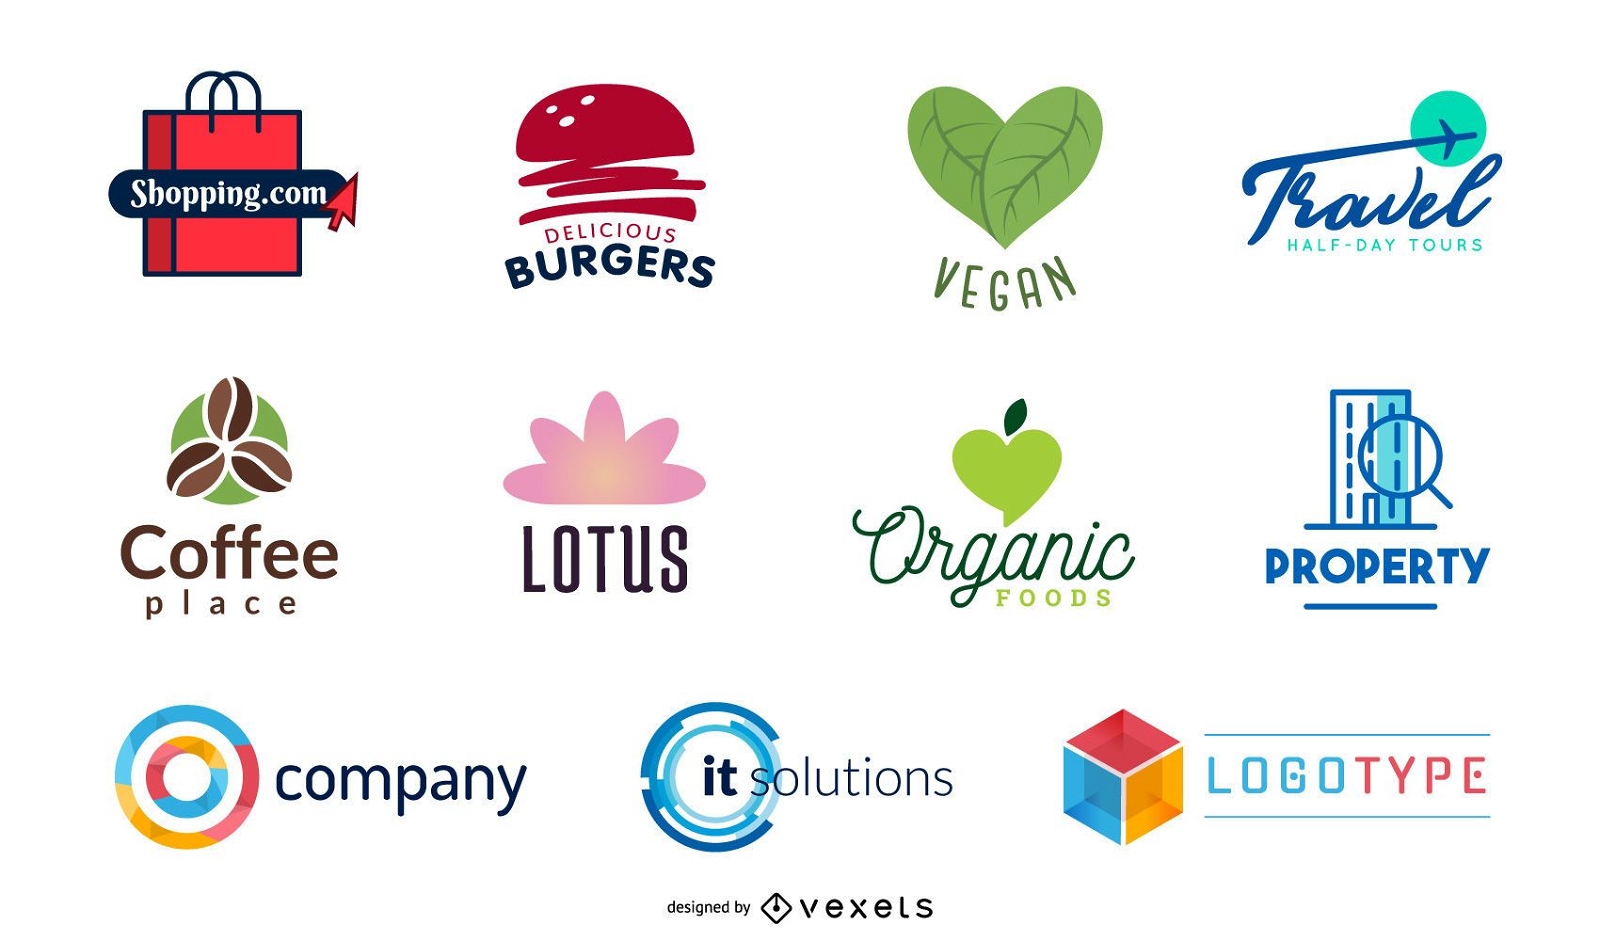 How To Use these Logo Design Elements for Your Iconic Brand Identity |  ZillionDesigns.com